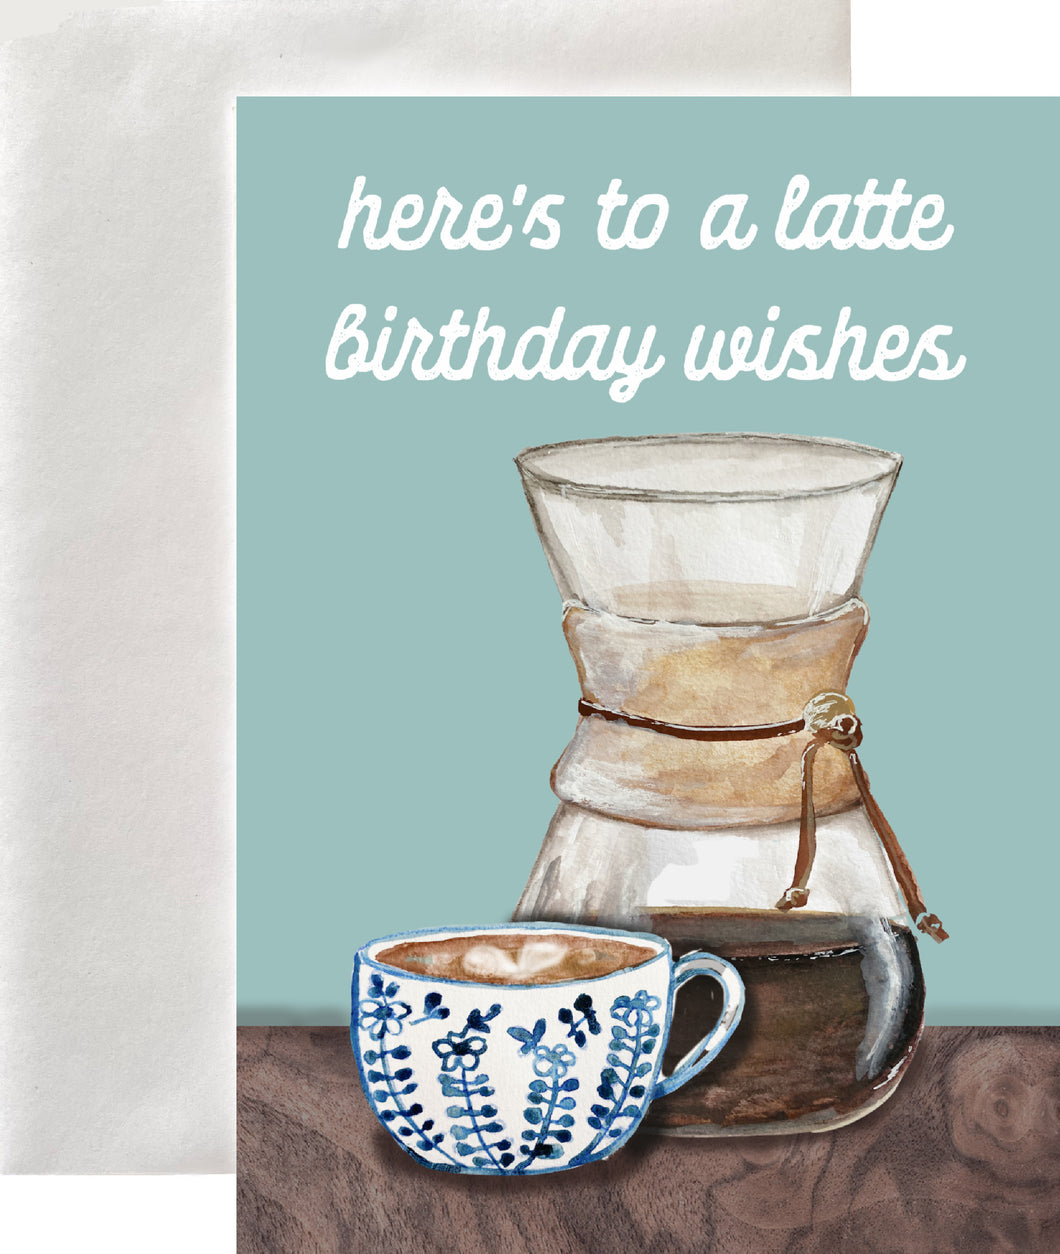 Here's To A Latte Birthday Wishes Greeting Card Blank Interior